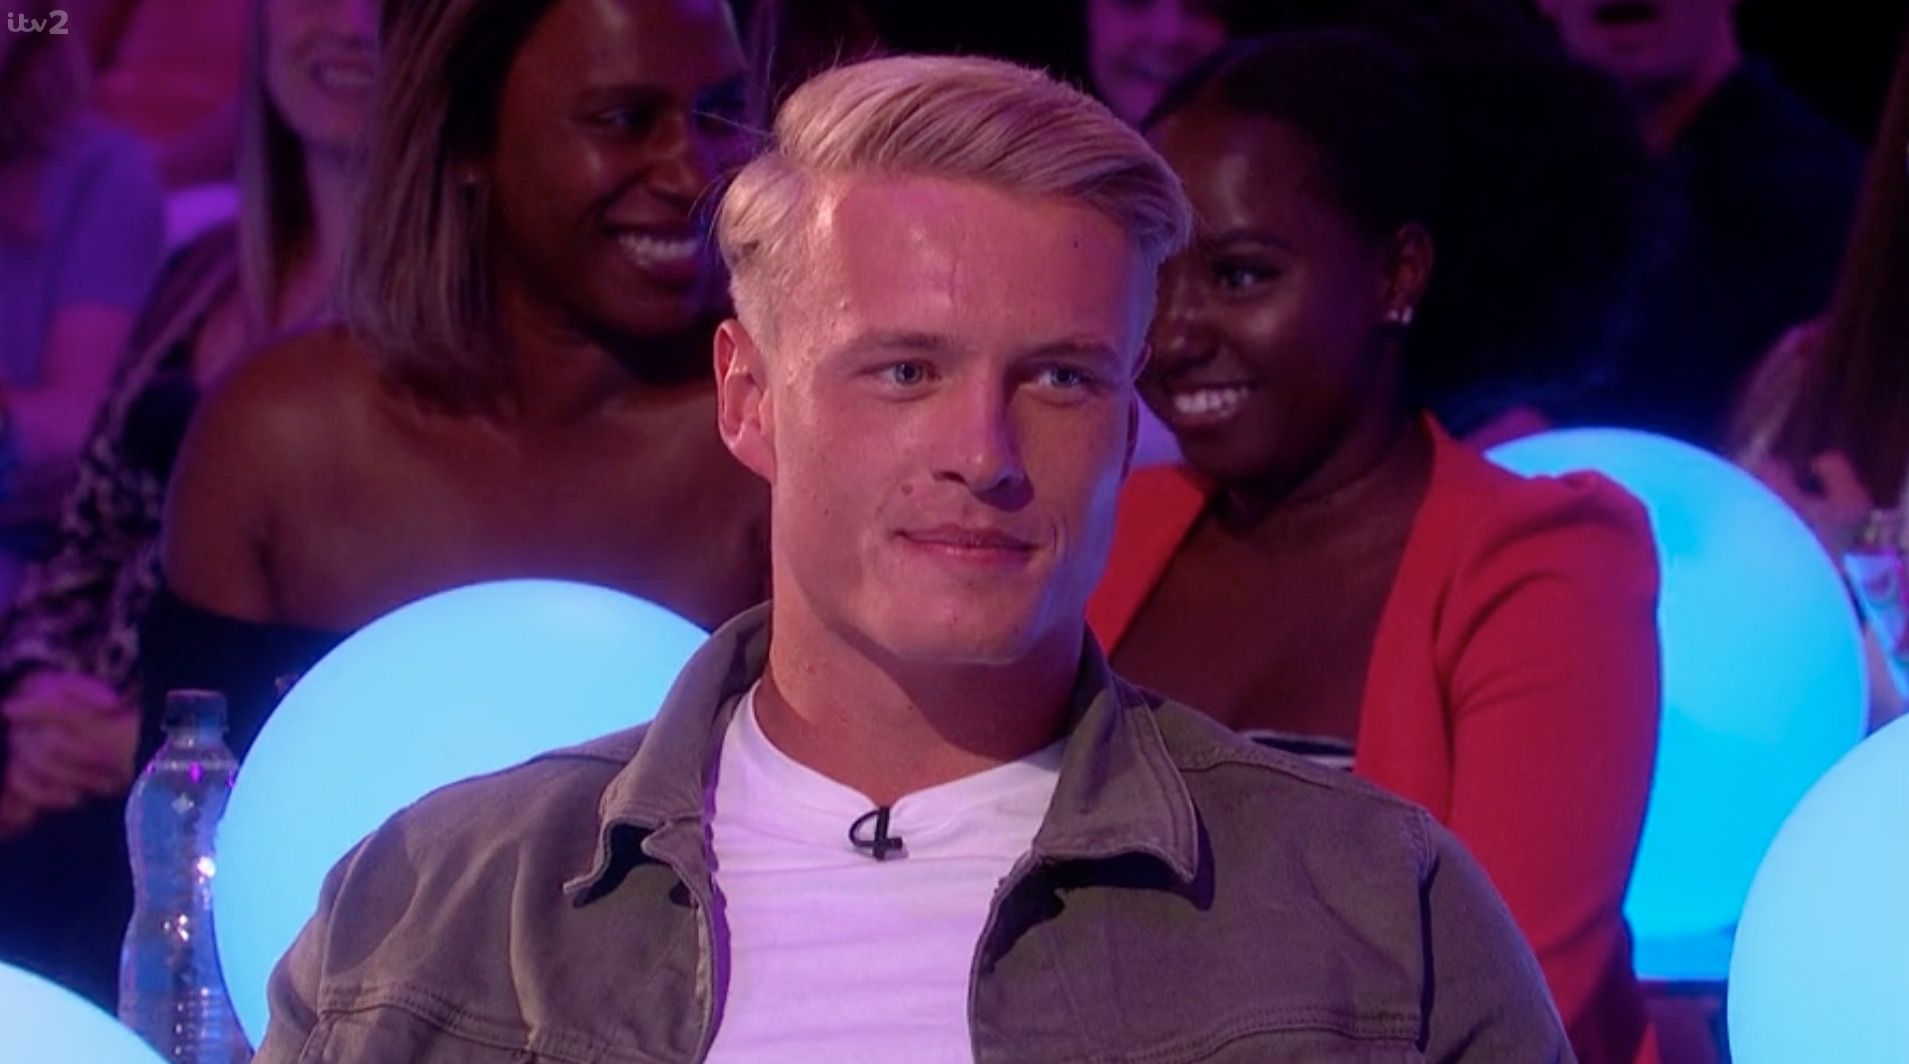 Love Island: Aftersun fans call out awkward 'big boobs' comment